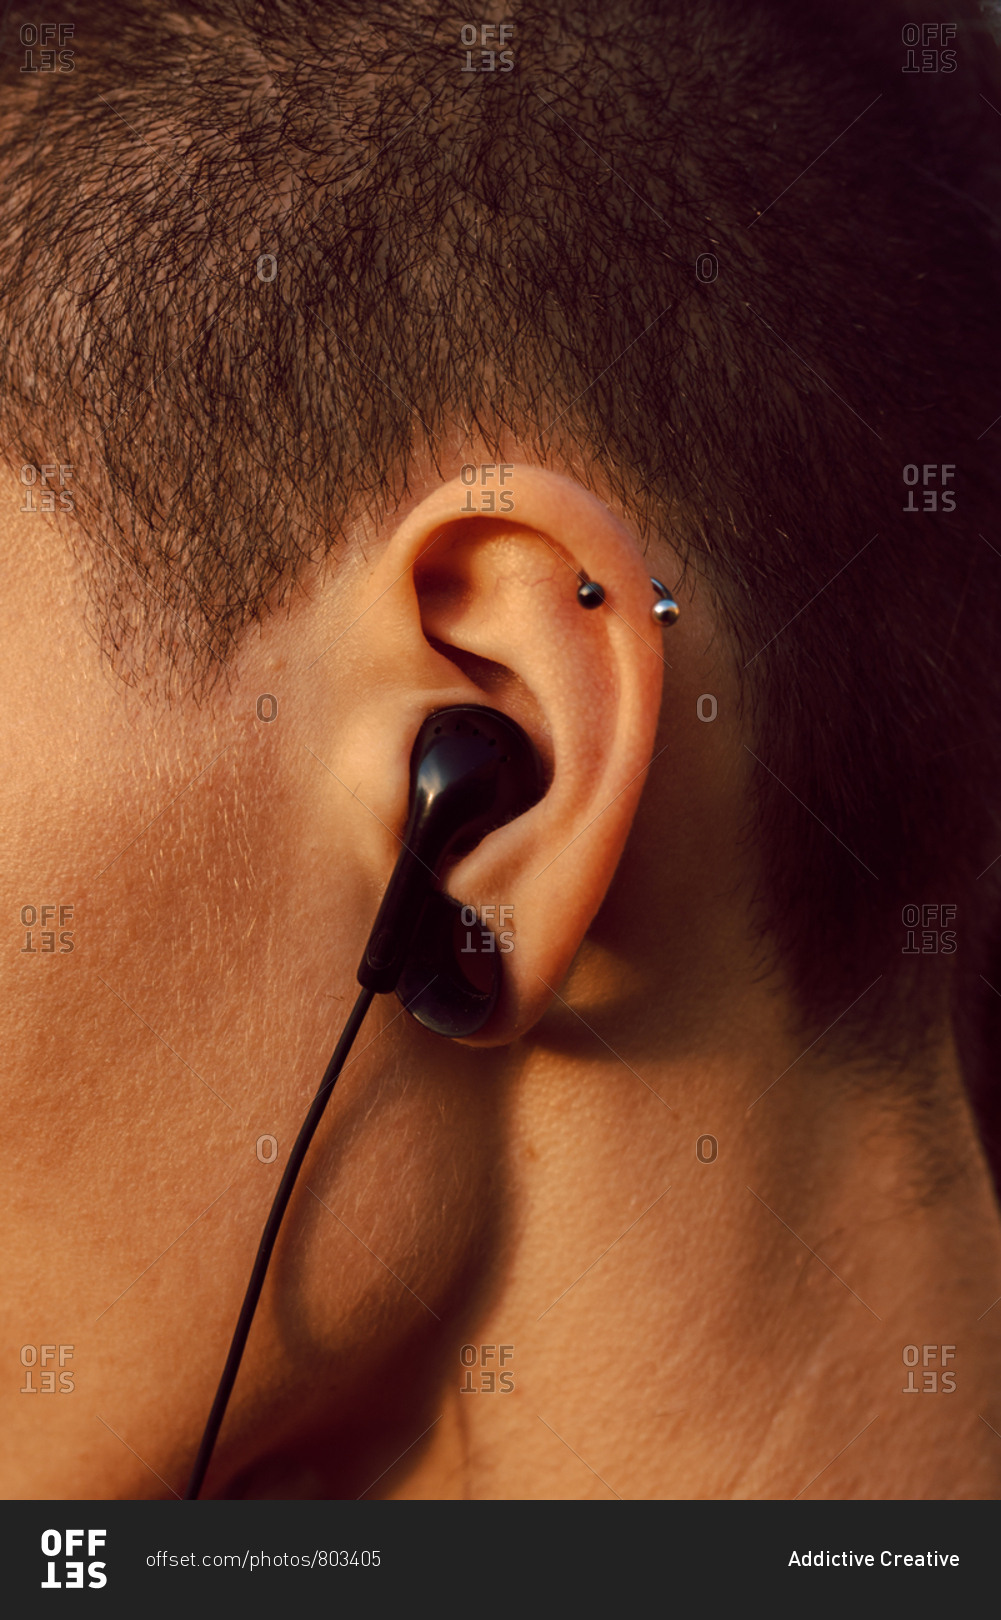 Side view of crop head of hipster with piercing and earphones in ear